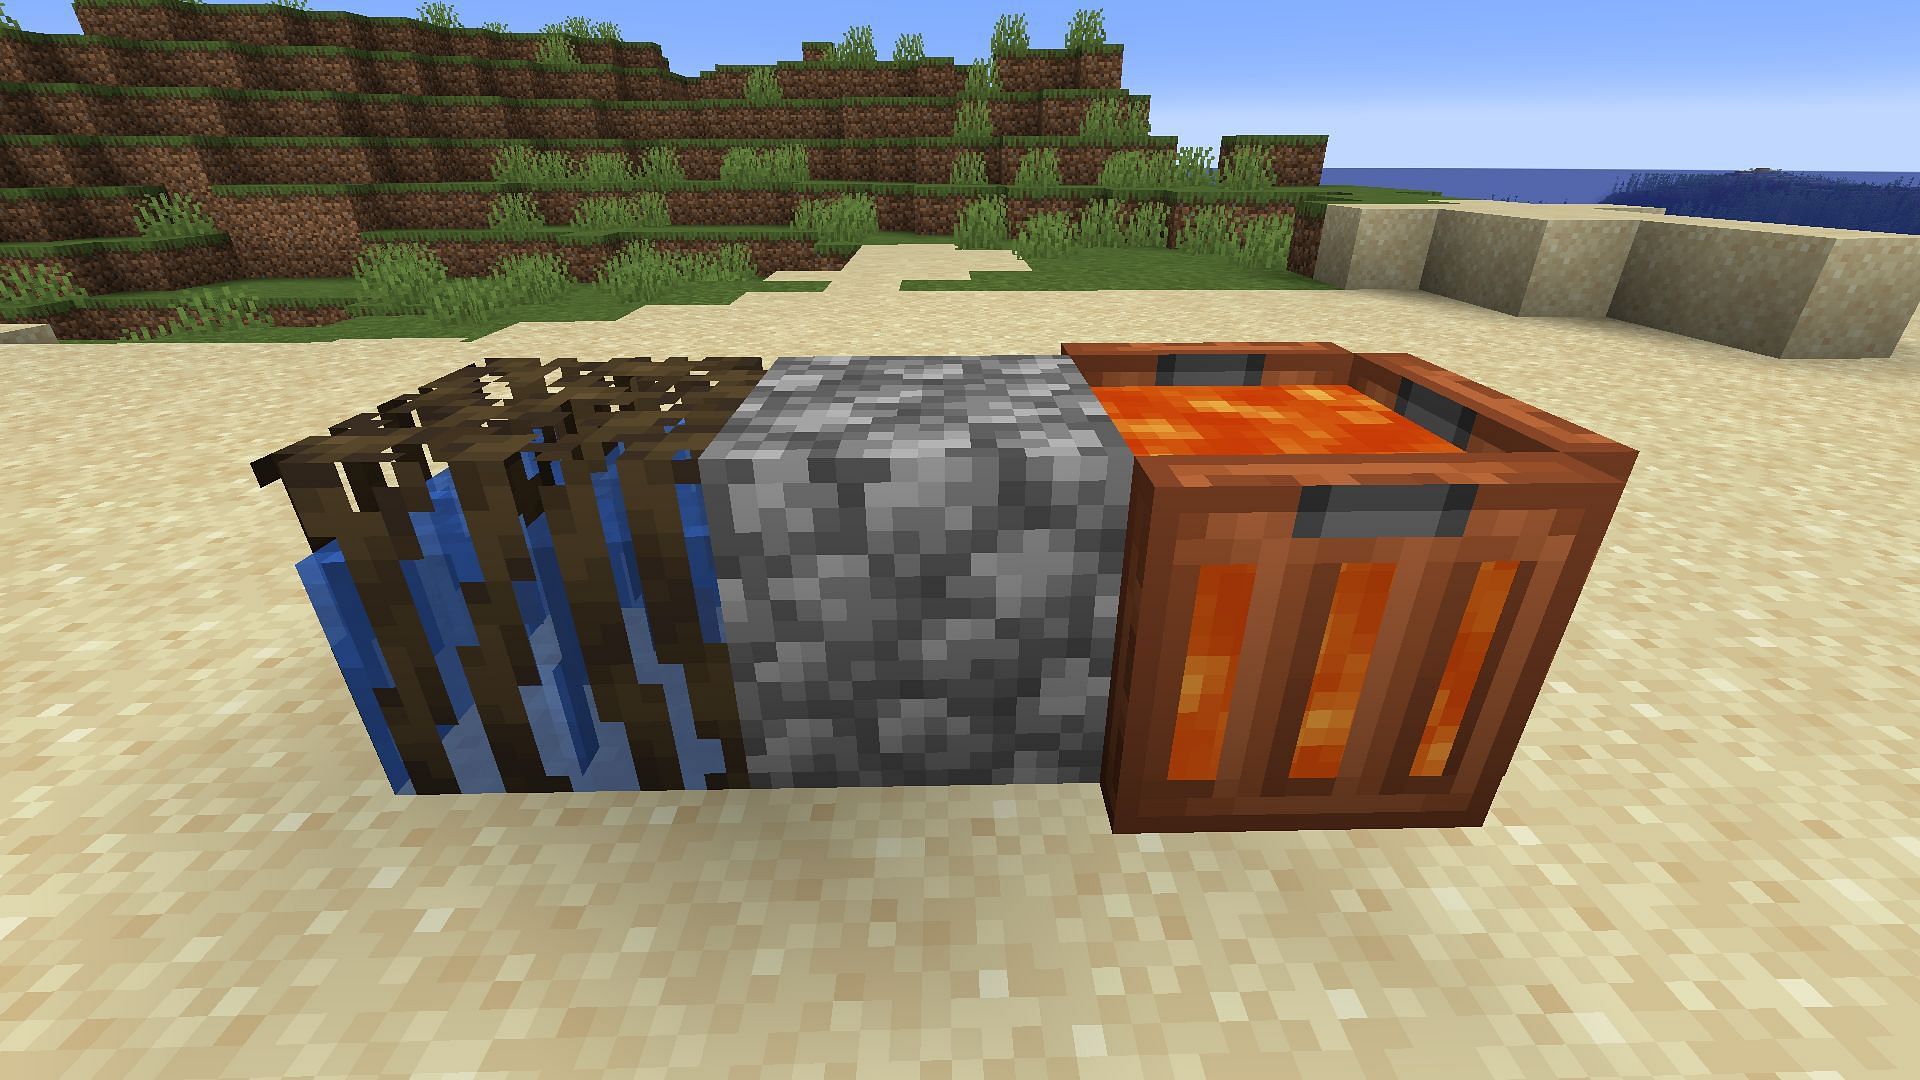 Mangrove roots provide a new way to create a cobblestone generator in Minecraft (Image via Mojang)